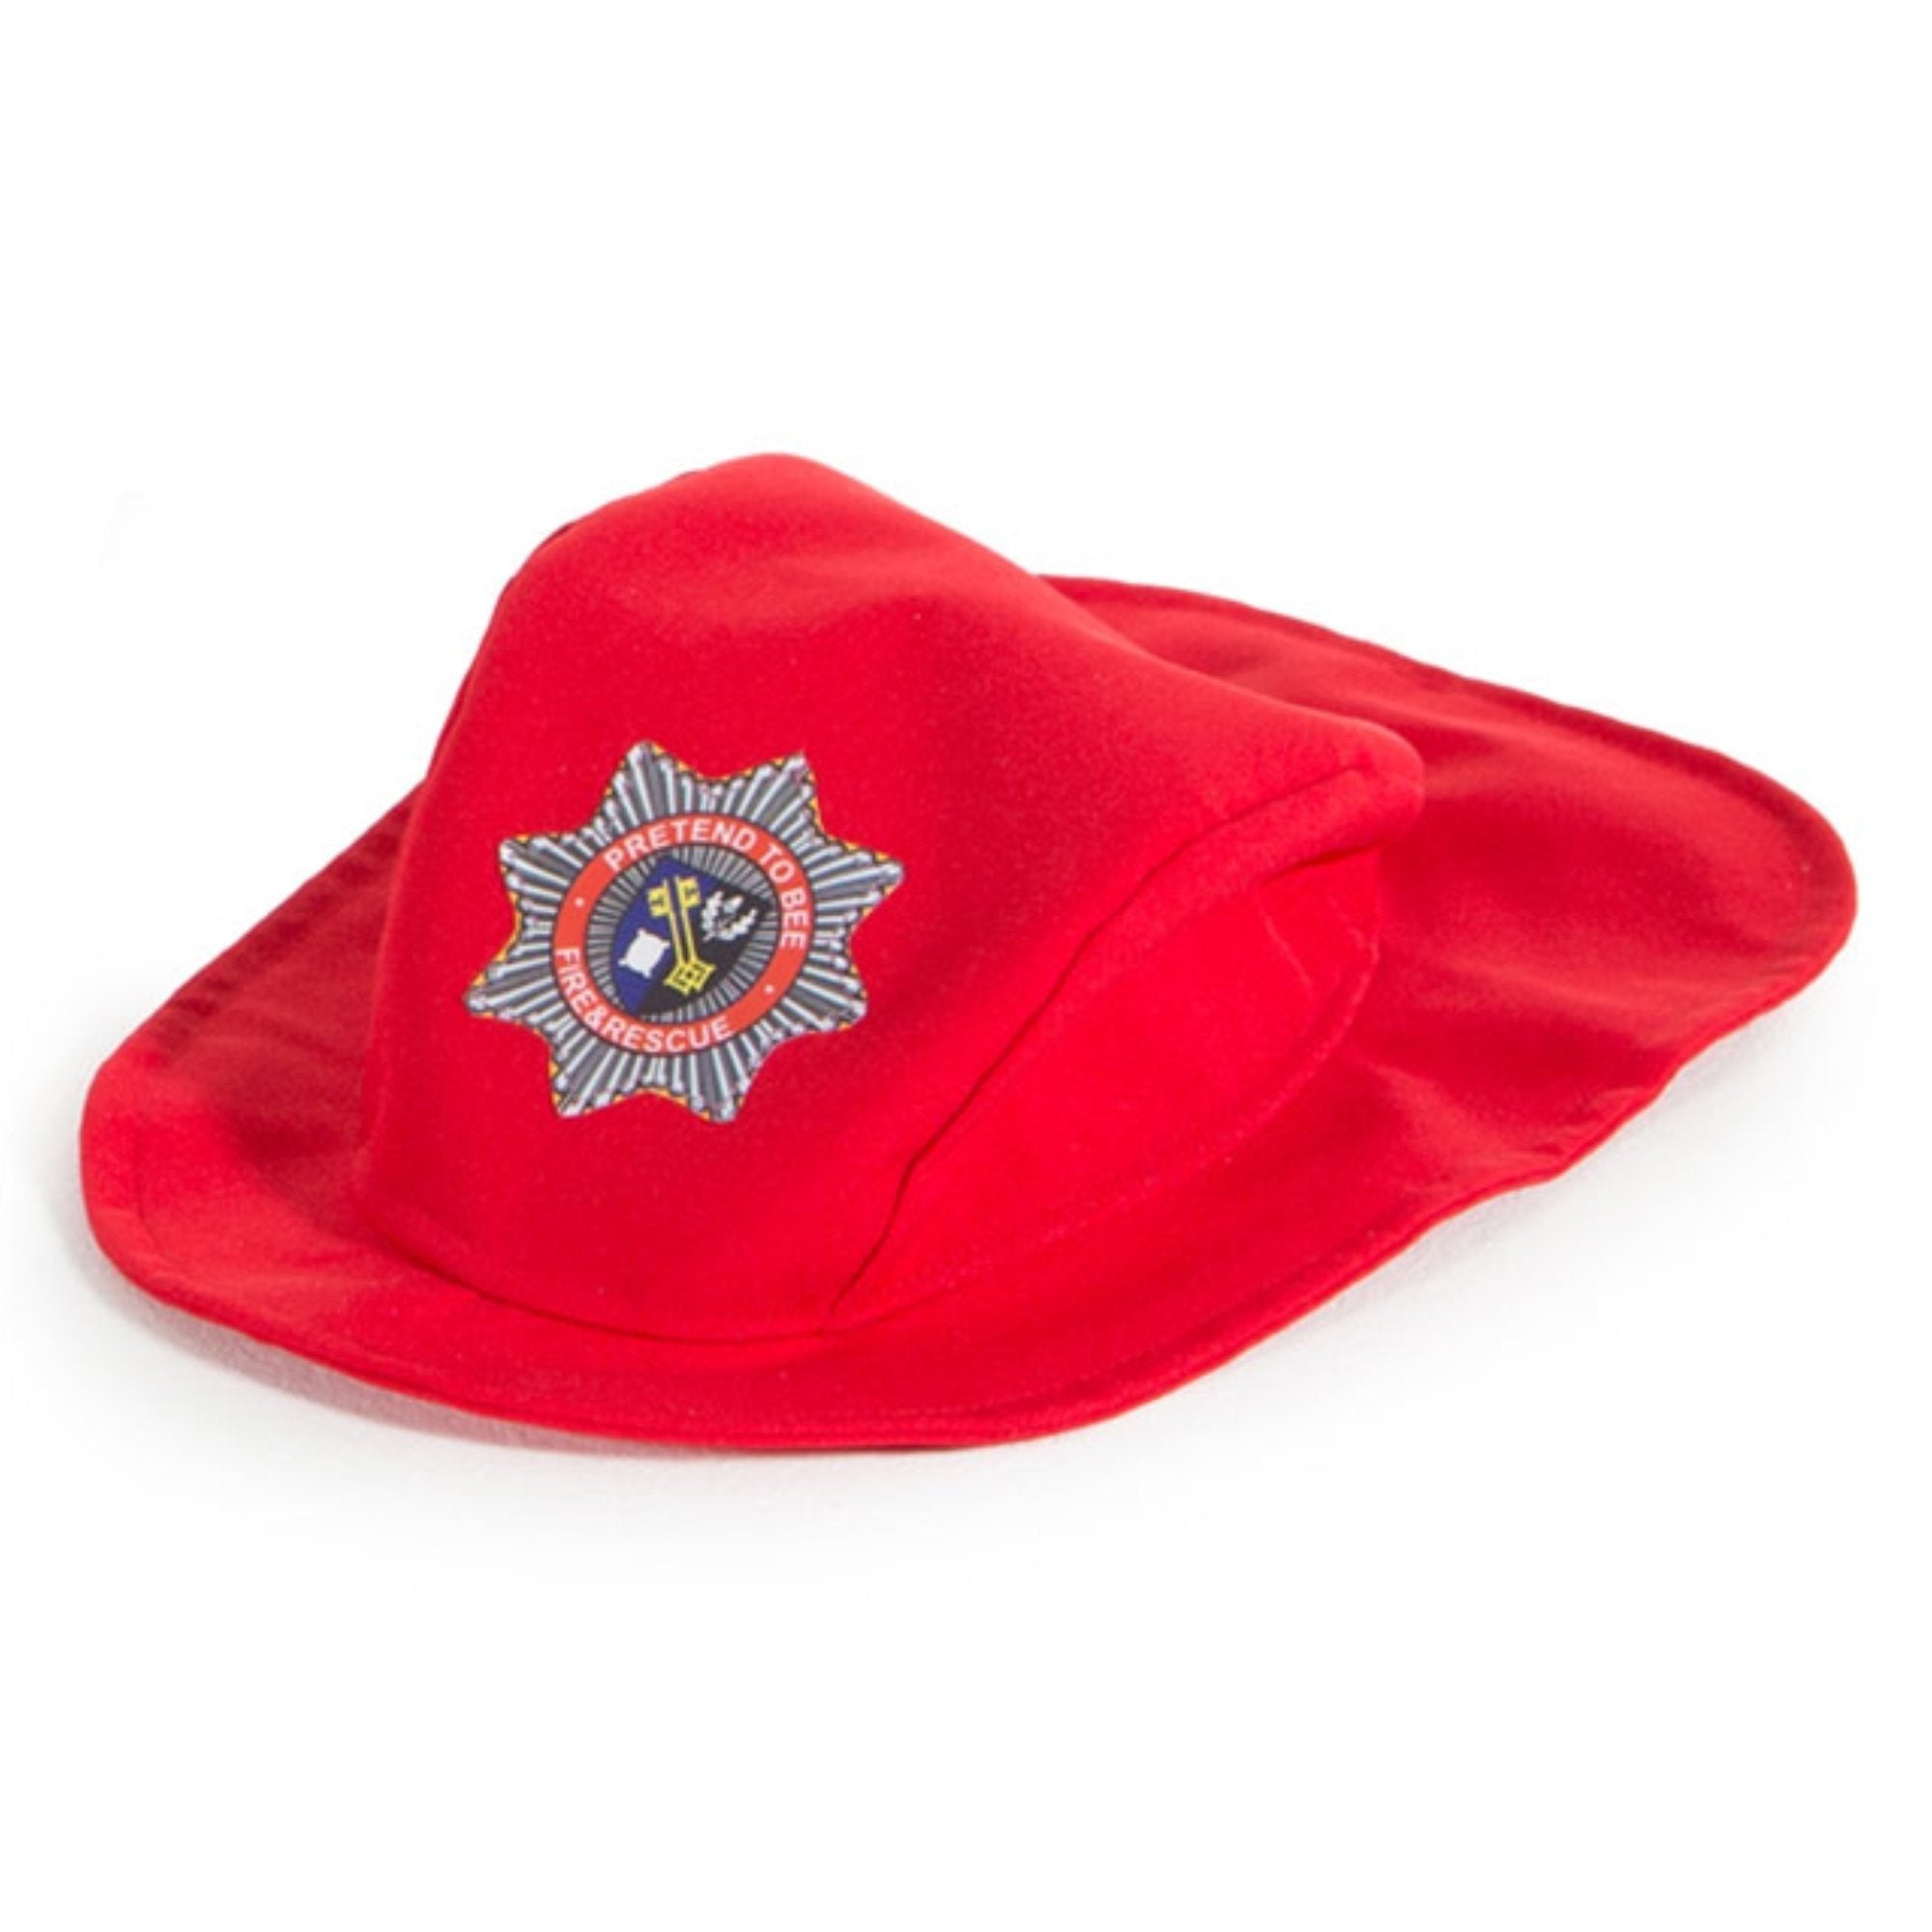 Occupational Hats 5pk, A set of 5 People who help dressing up soft hats.The Occupational Hats are more rugged than plastic hats and are the perfect solution for long term durability.The Occupational Hats are durable for stuffing into toy boxes etc. Red Firefighter’s Hat with red and yellow ‘Fire Chief’ front printed emblem. White Traffic Police Hat with distinctive black and white chequered pattern and black peak. Traditional Police Hat with a ‘Police Badge’ printed emblem on the front, distinctive black an